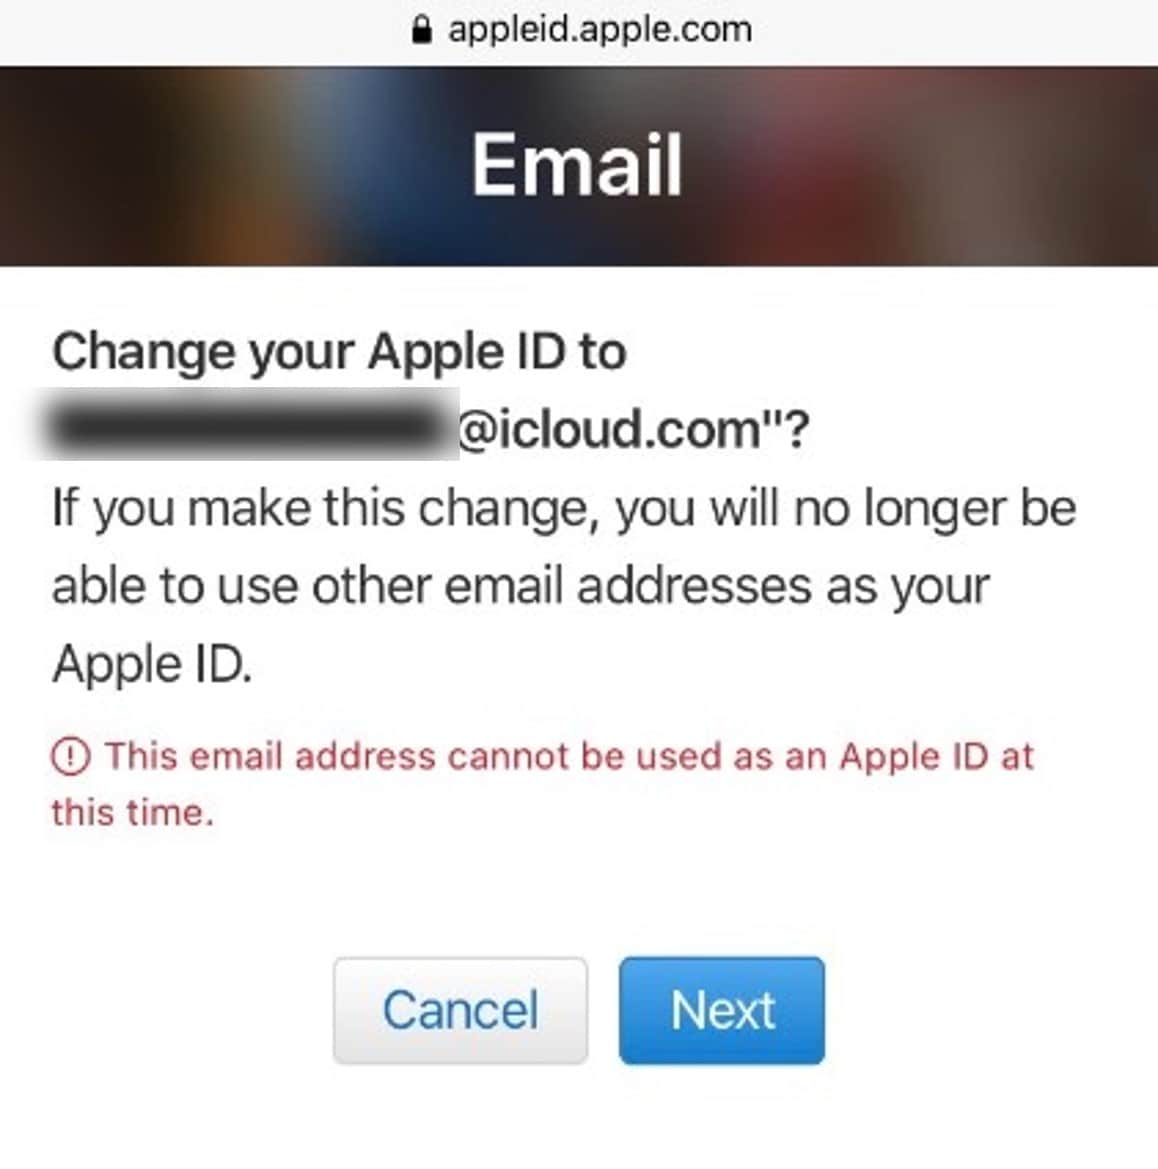 cambiar apple id a icloud email